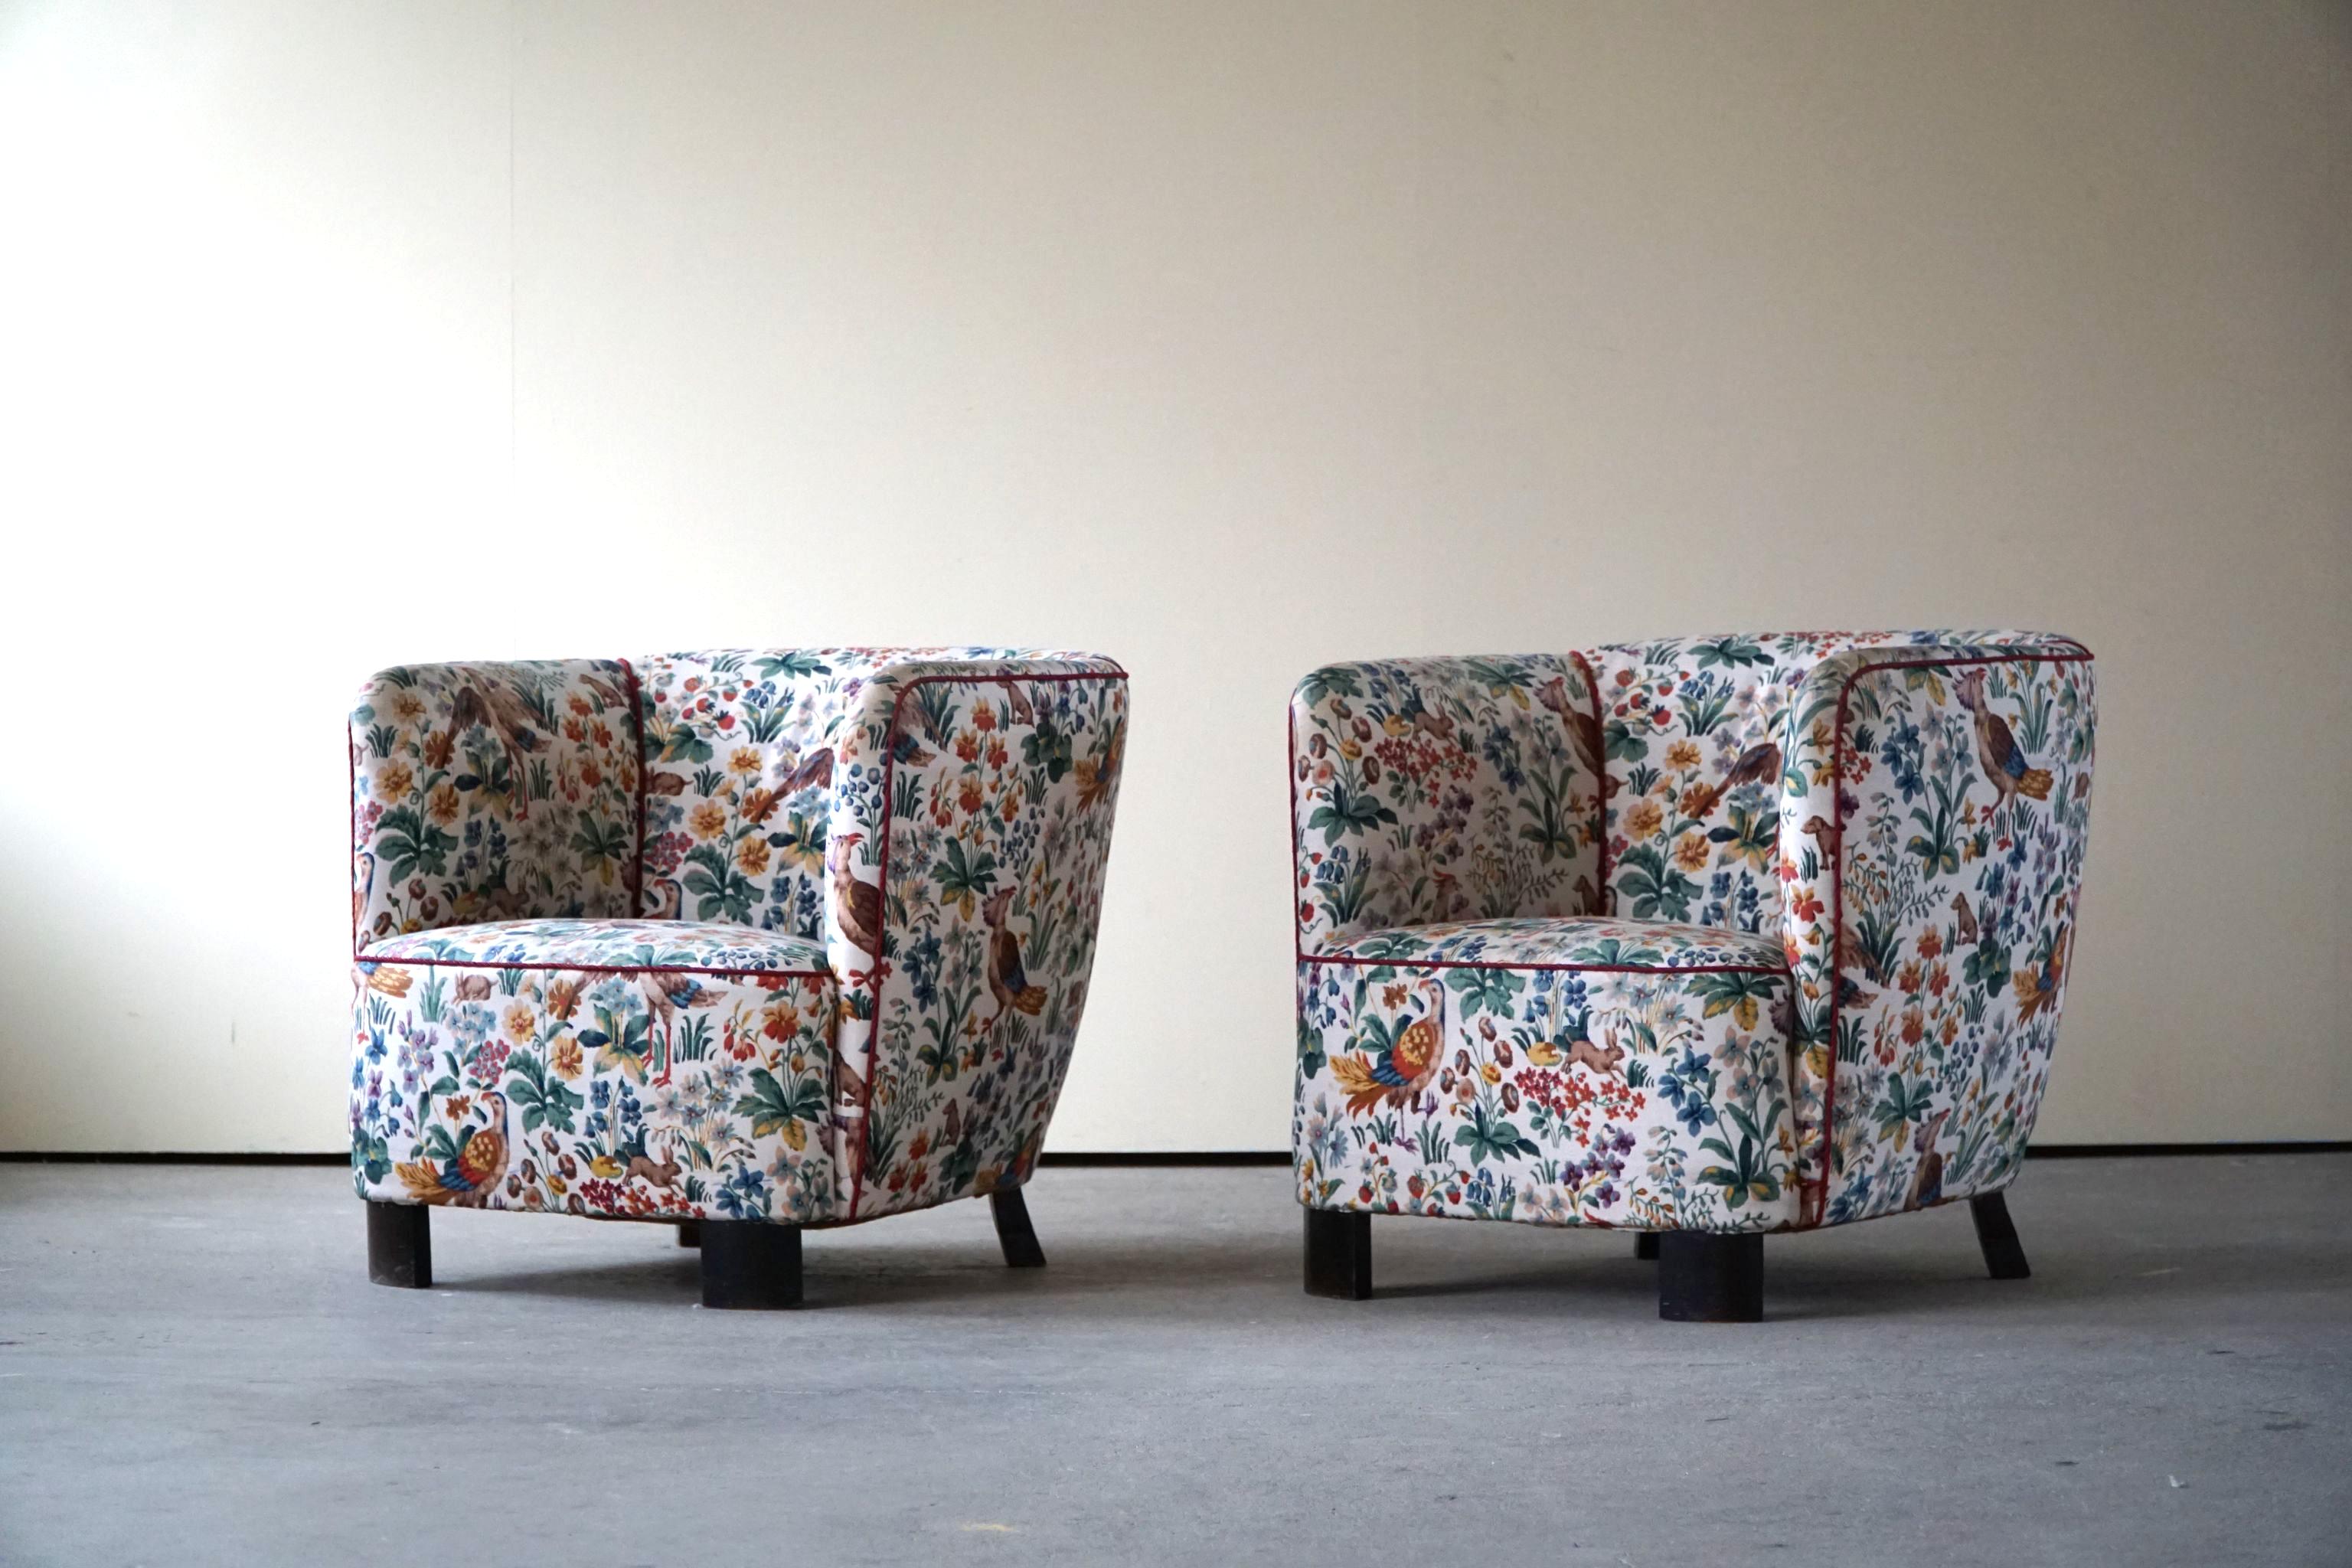 A rare comfortable pair of easy chairs with some beautiful curves. Original fabric with decorative bird motifs, made by a skilled Danish cabinetmaker in the 1940s. These beautiful chairs are made in the style of the Danish designer & architect Viggo